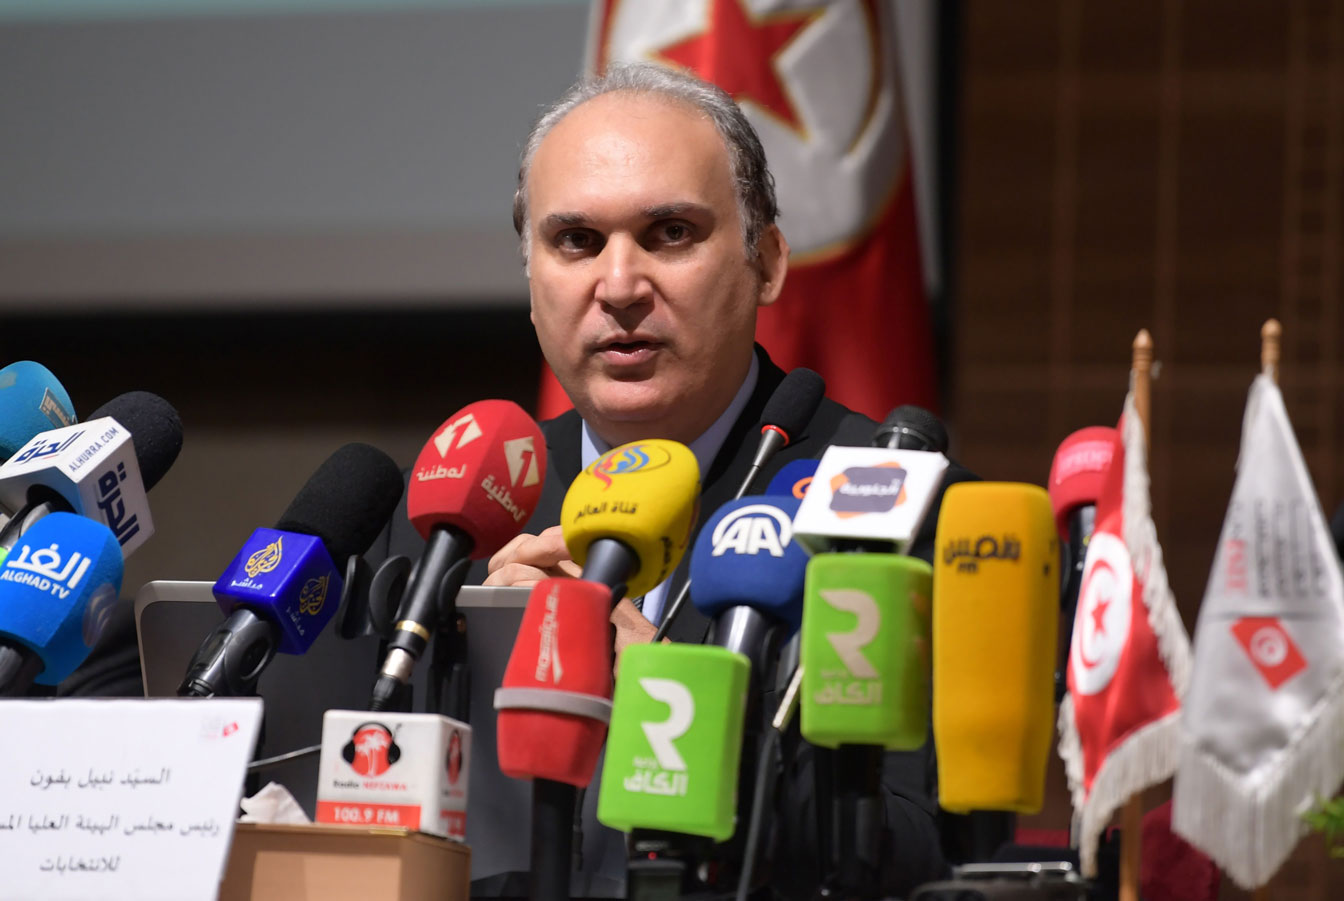 Nabil Baffoun, head of Tunisia's Independent High Authority for Elections